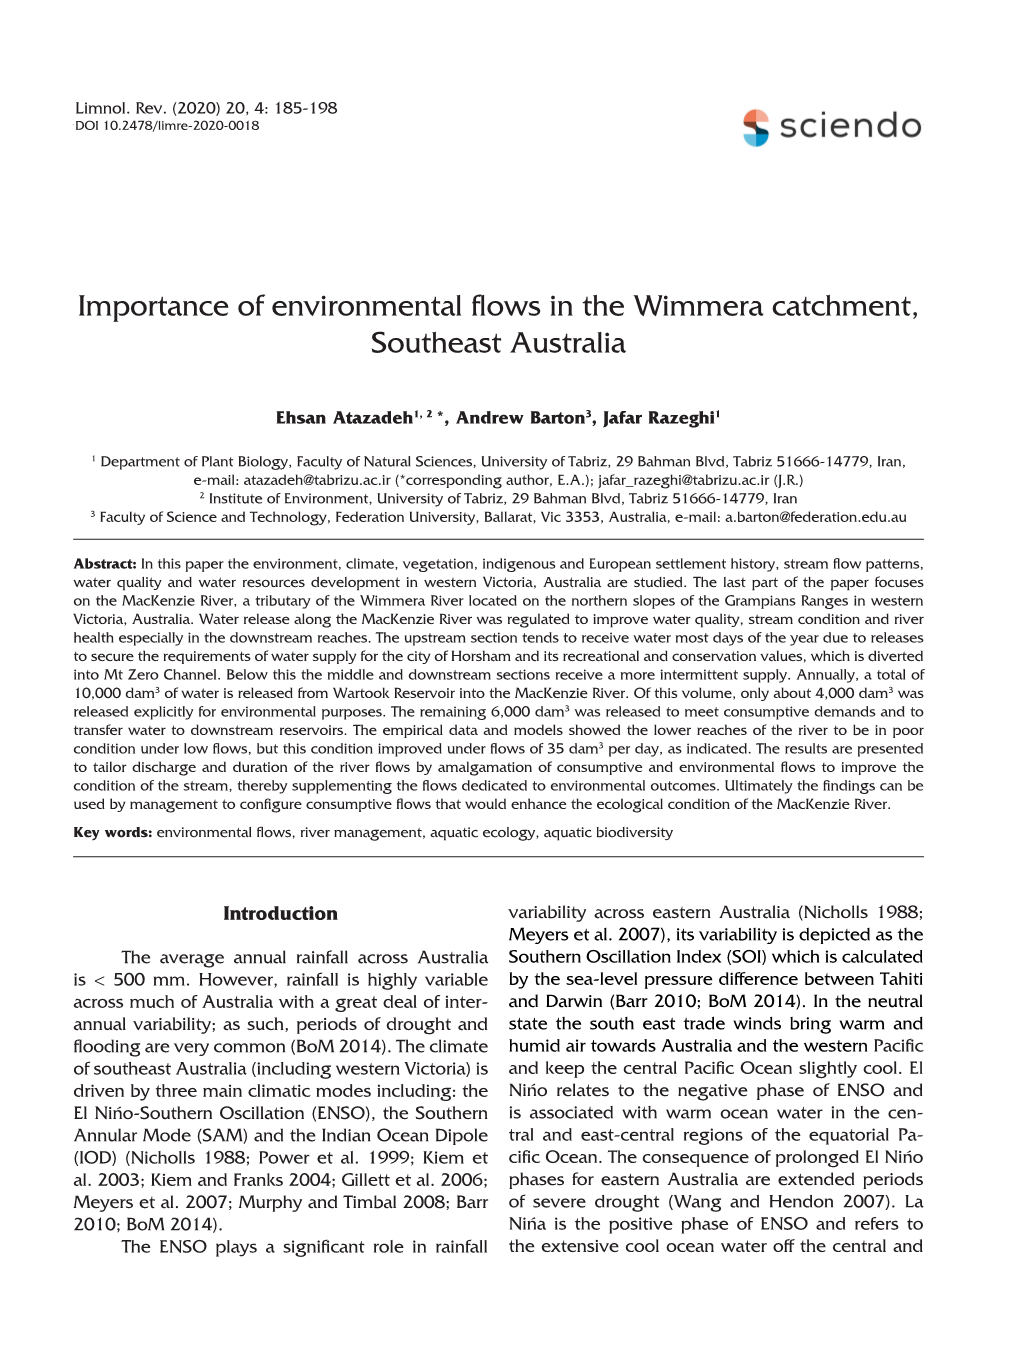 Importance of Environmental Flows in the Wimmera Catchment, Southeast Australia